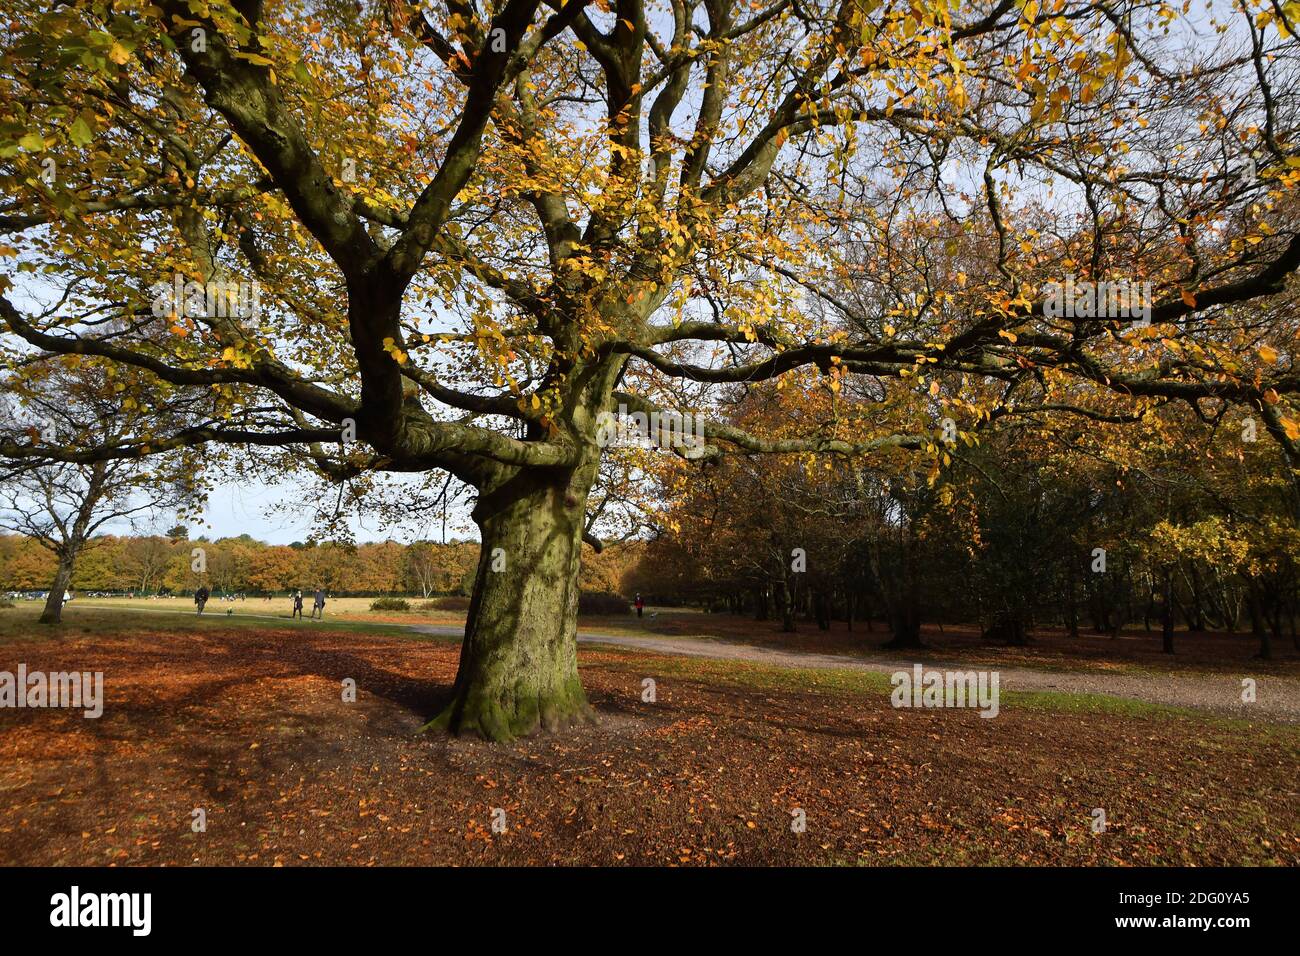 Pictured walkers out enjoying the late Autumn sunshine in Sutton Park, Sutton Coldfield, Birmingham, Thursday 12th November 2020. Many people are taking the opportunity too use public areas during the month long lockdown for a second time. Stock Photo